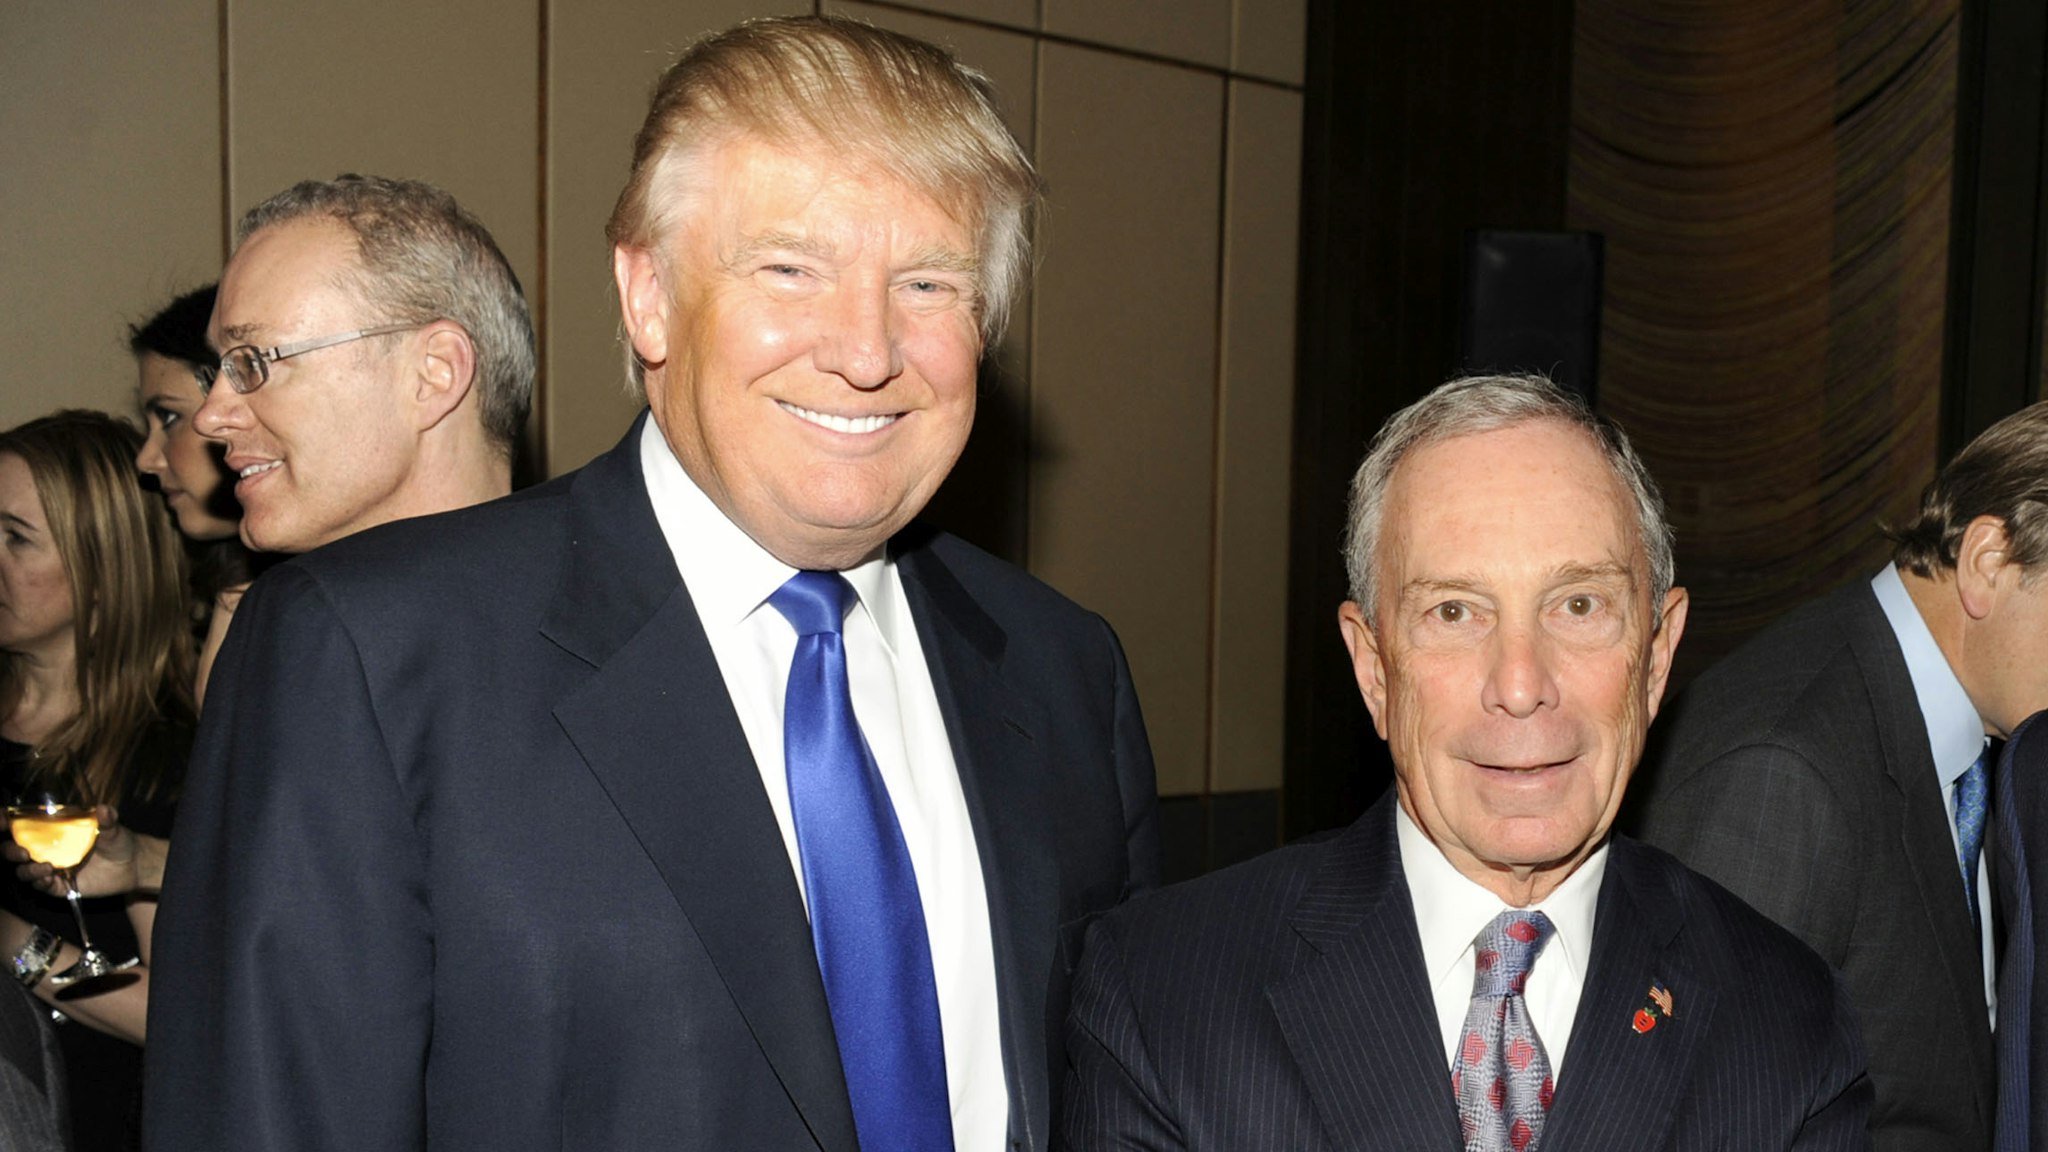 NEW YORK, NY - MARCH 14: (L-R) Donald Trump, Mayor Michael Bloomberg and Jared Kushner attend The New York Observer 25th Anniversary at Four Seasons Restaurant on March 14, 2013 in New York City.